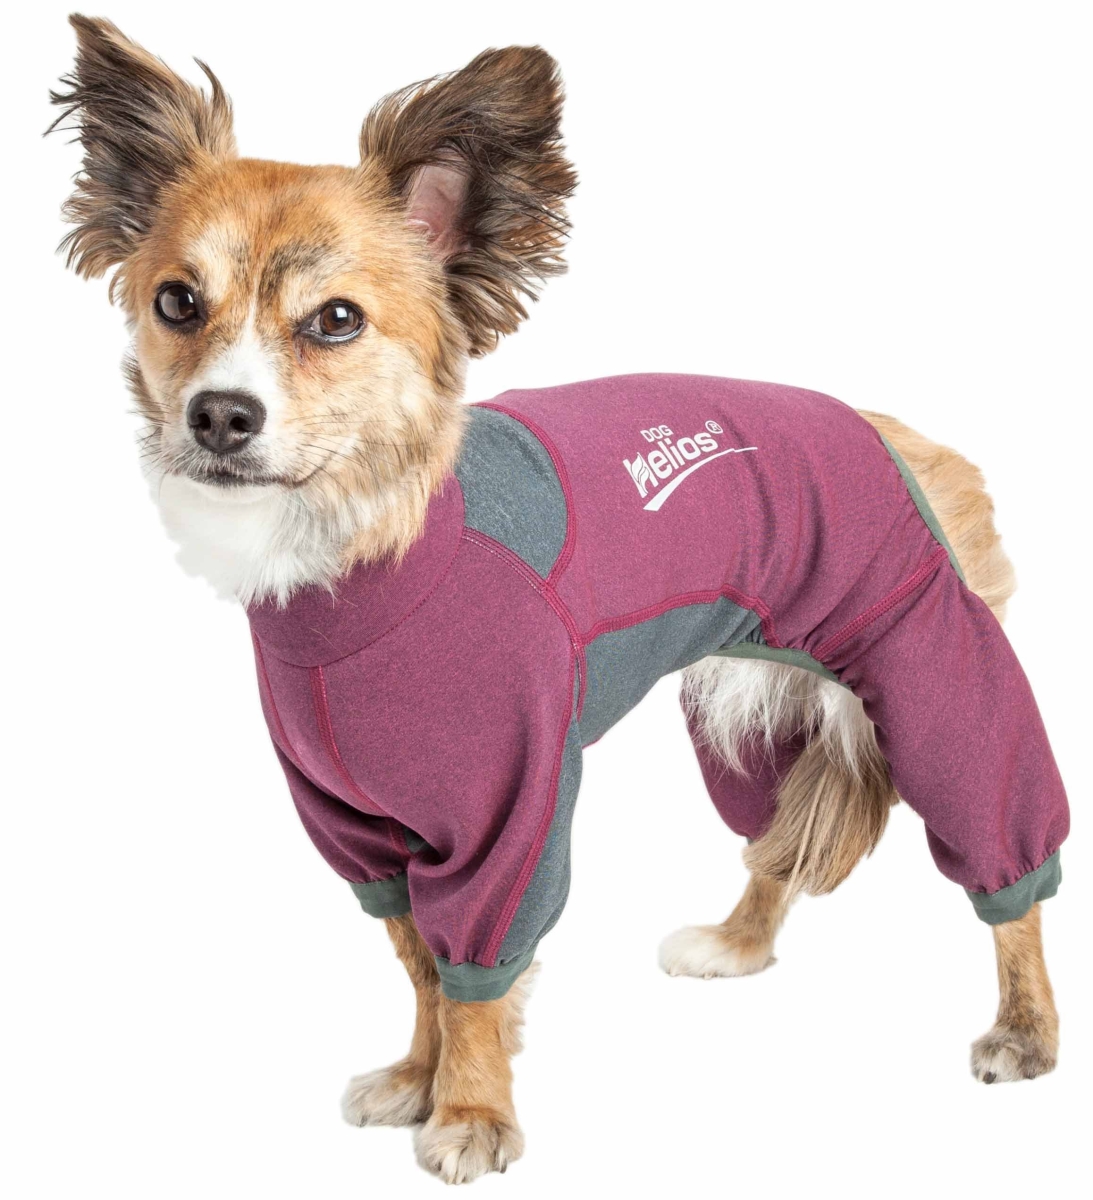 Yghl8pksm Rufflex 4-way-stretch Breathable Full Bodied Performance Dog Warmup Track Suit - Pink & Grey, Small